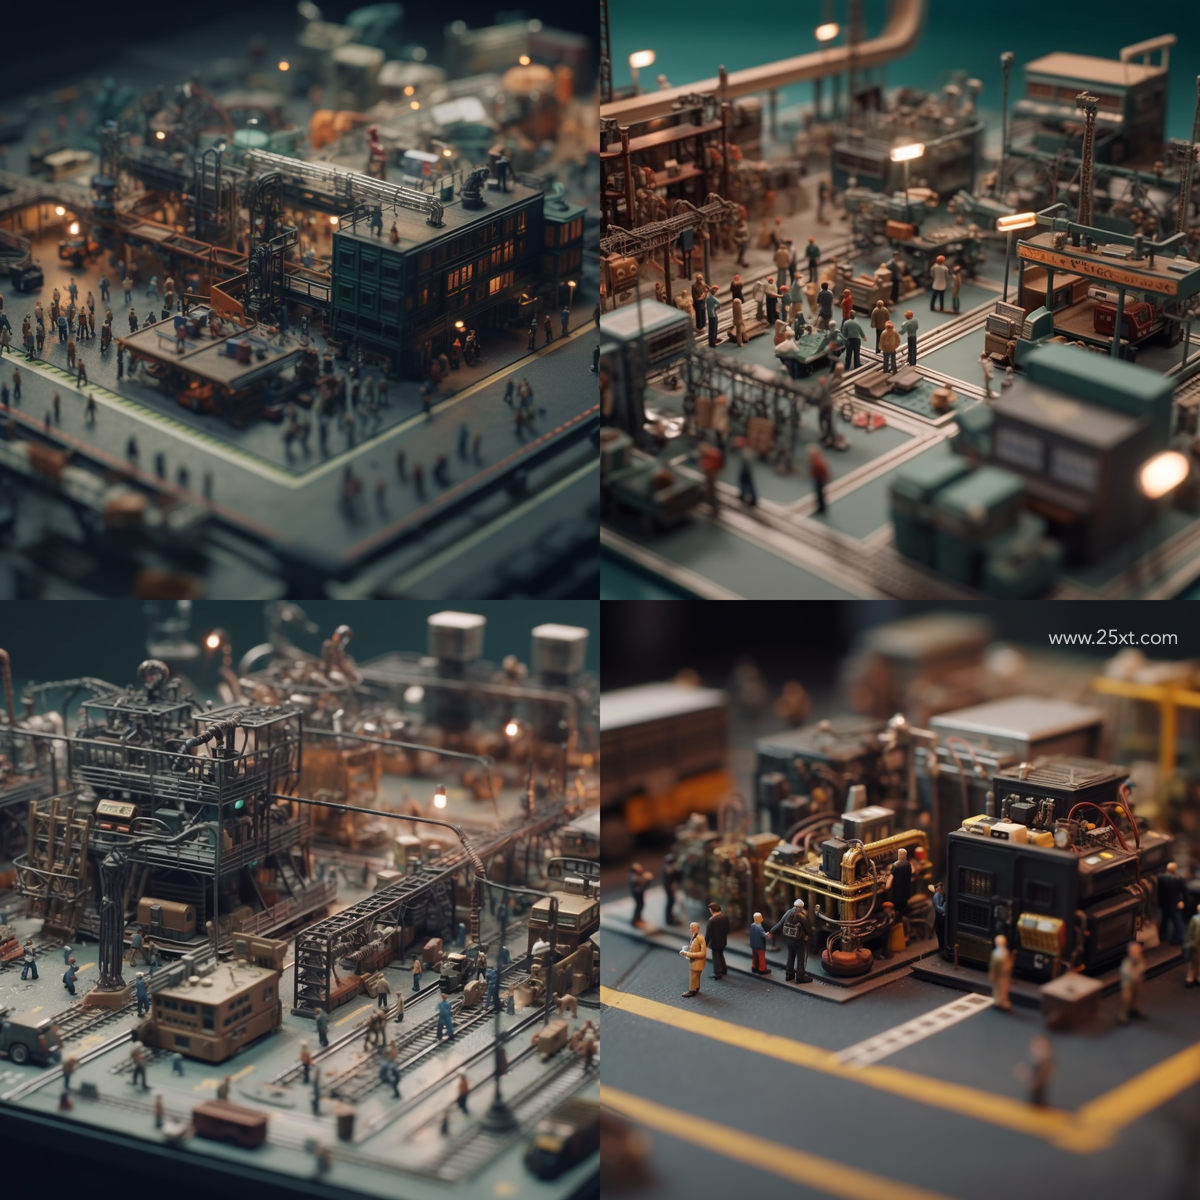 Yao_a_stage_built_on_a_circuit_board_miniature_people_walking_a_c016fc6f-94c6-46f8-91ac-c1e132d64562.jpg